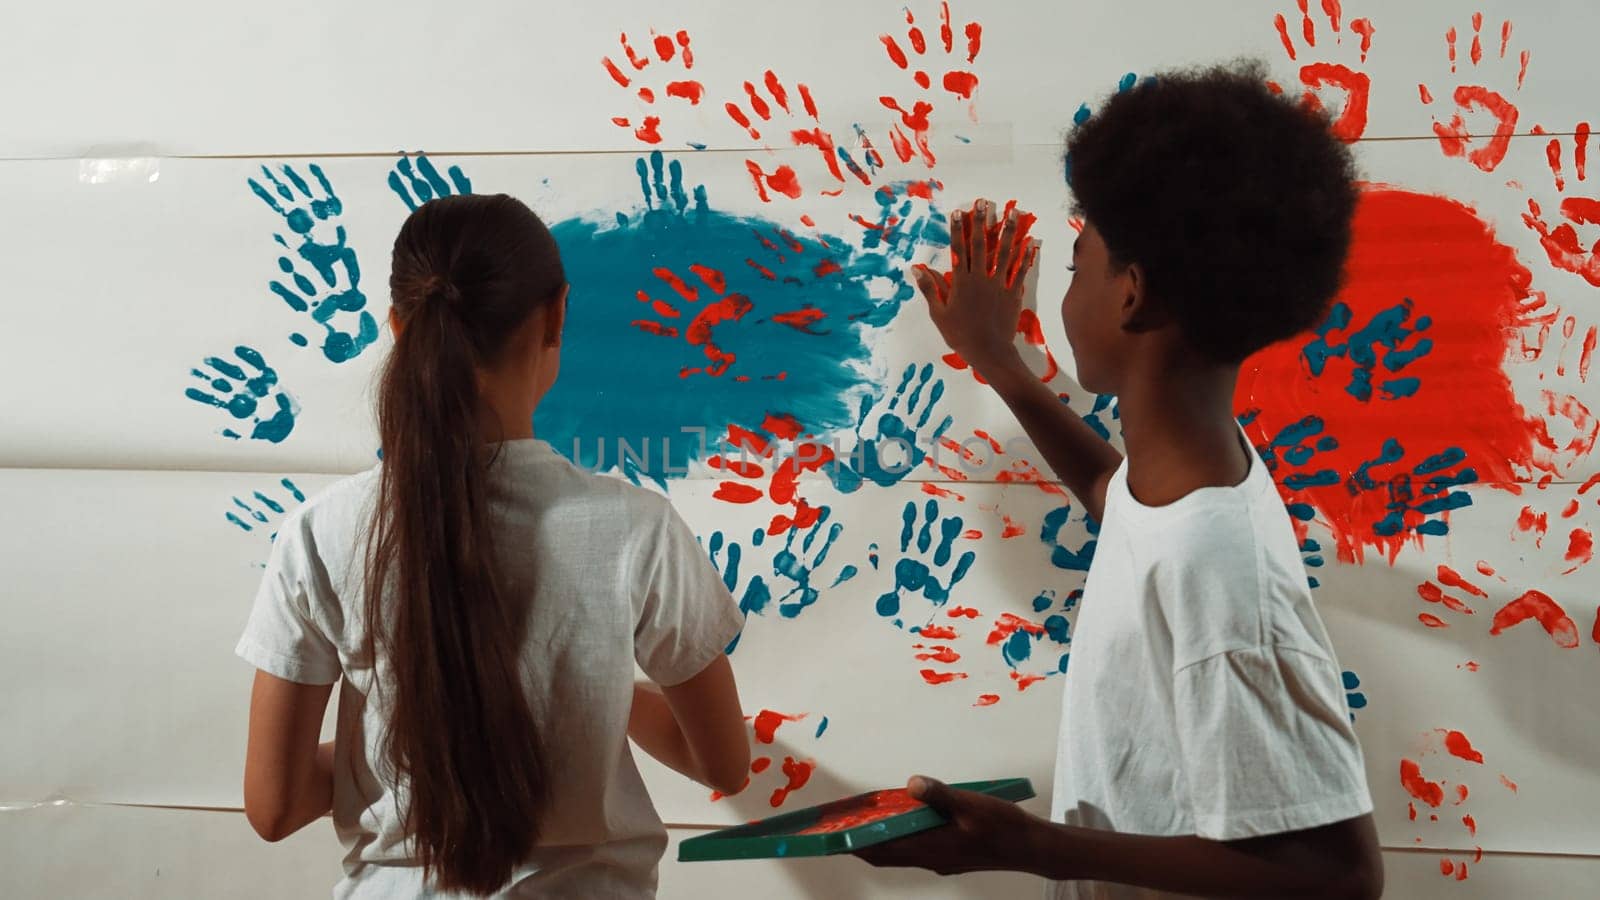 Highschool girl and african boy paint the wall with their hand. Edification. by biancoblue